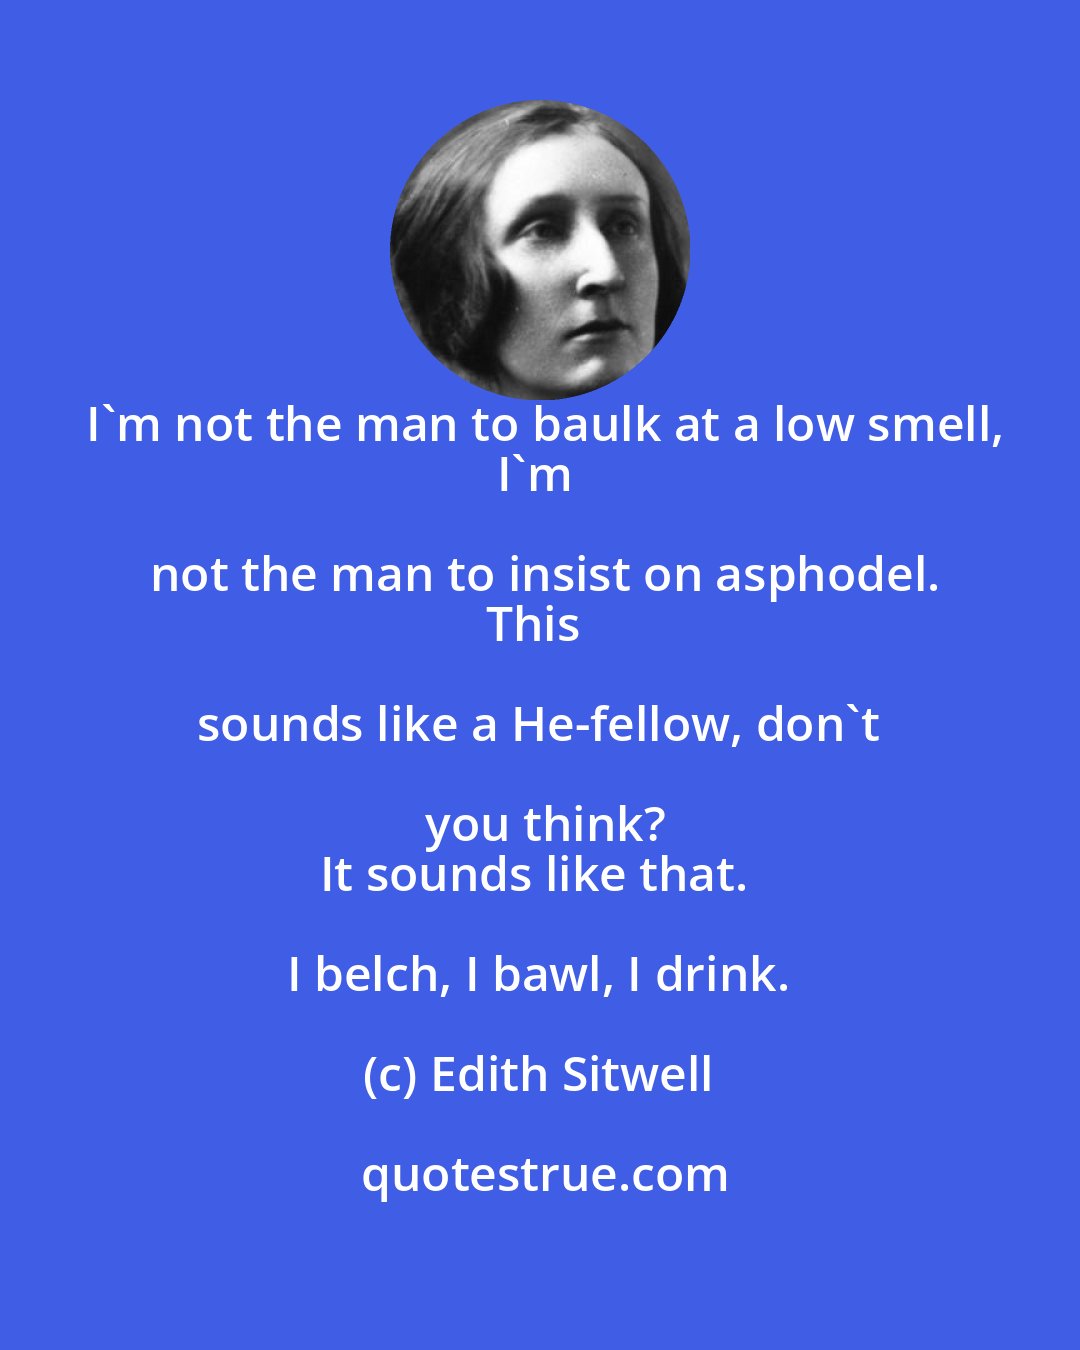 Edith Sitwell: I'm not the man to baulk at a low smell,
I'm not the man to insist on asphodel.
This sounds like a He-fellow, don't you think?
It sounds like that. I belch, I bawl, I drink.